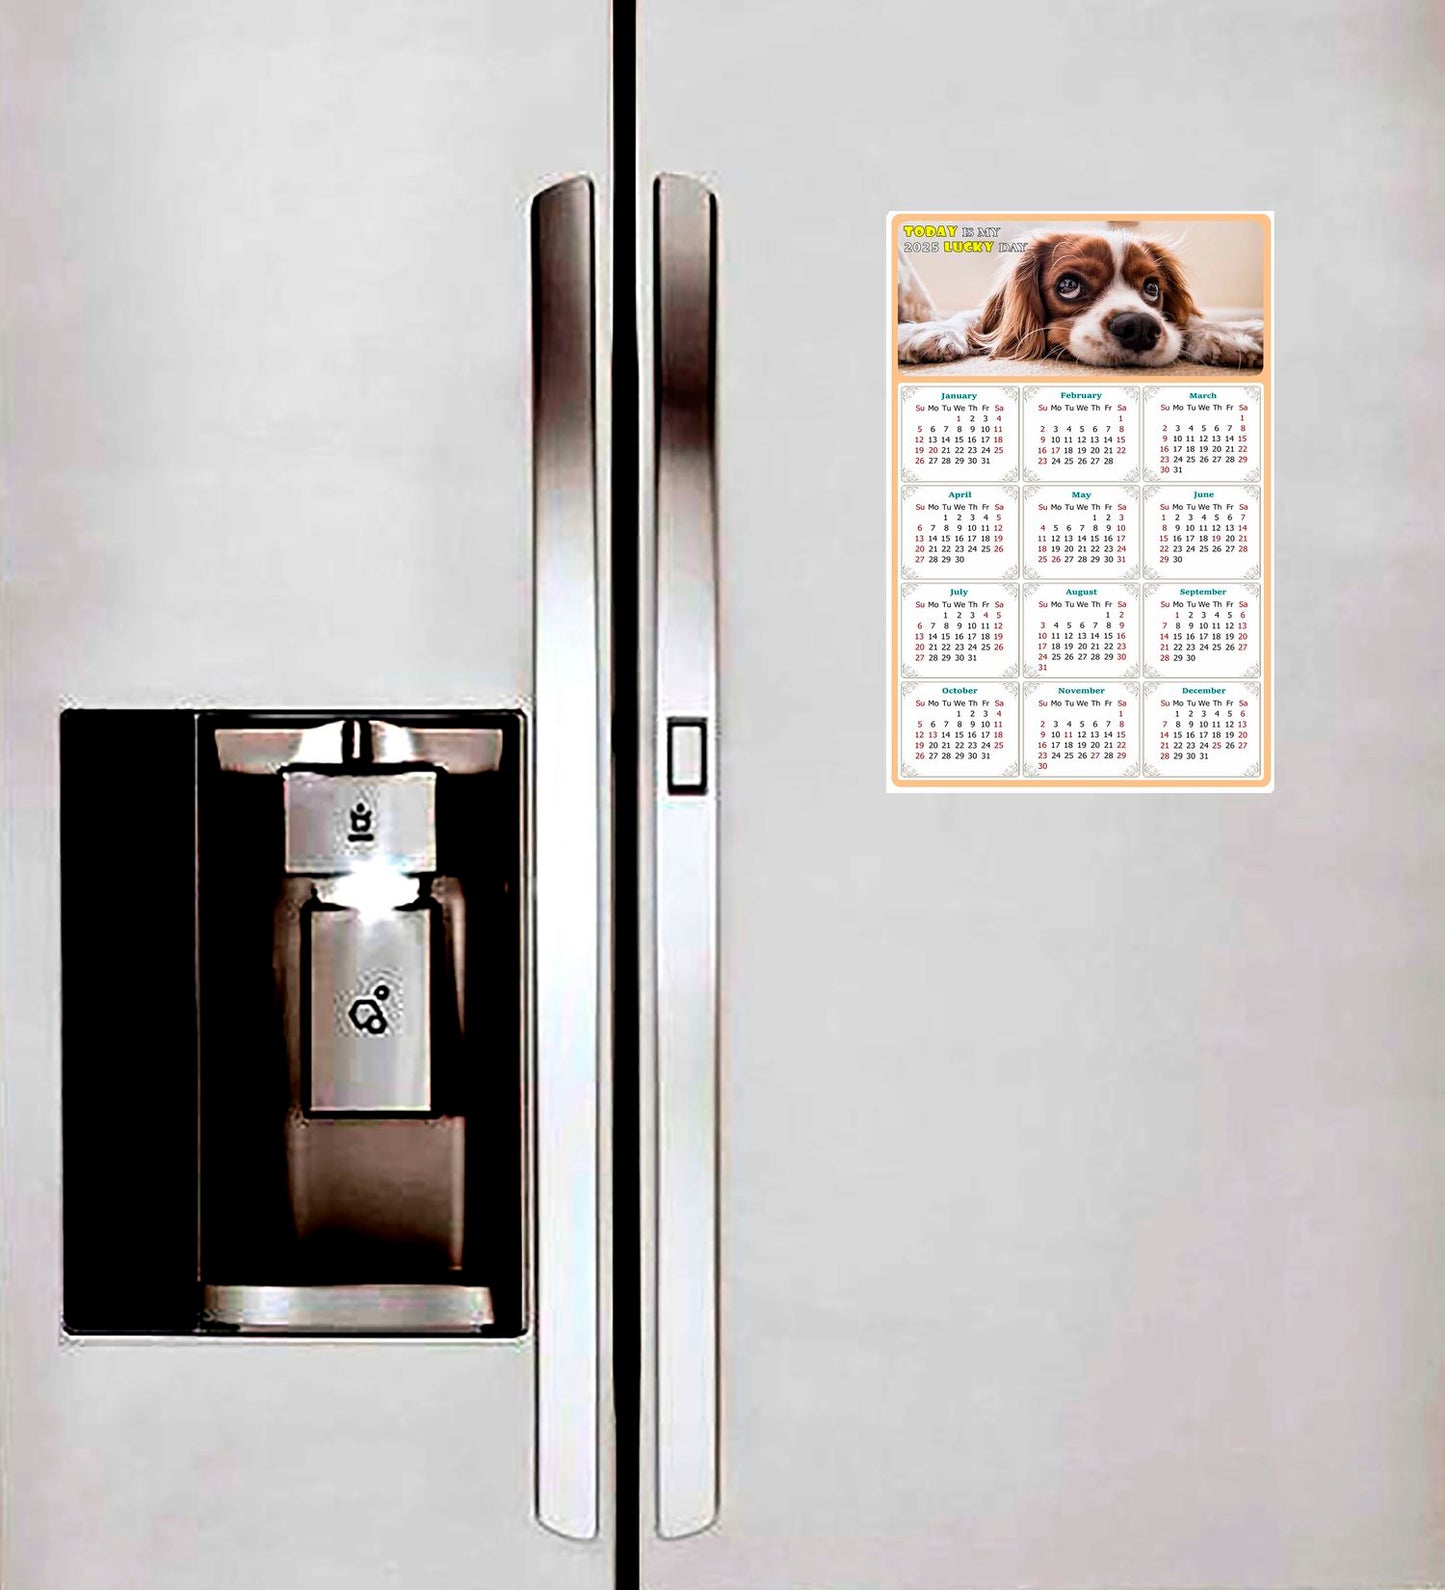 2025 Magnetic Calendar - Today is My Lucky Day (Fade, Tear, and Water Resistant)- Dogs Themed 01